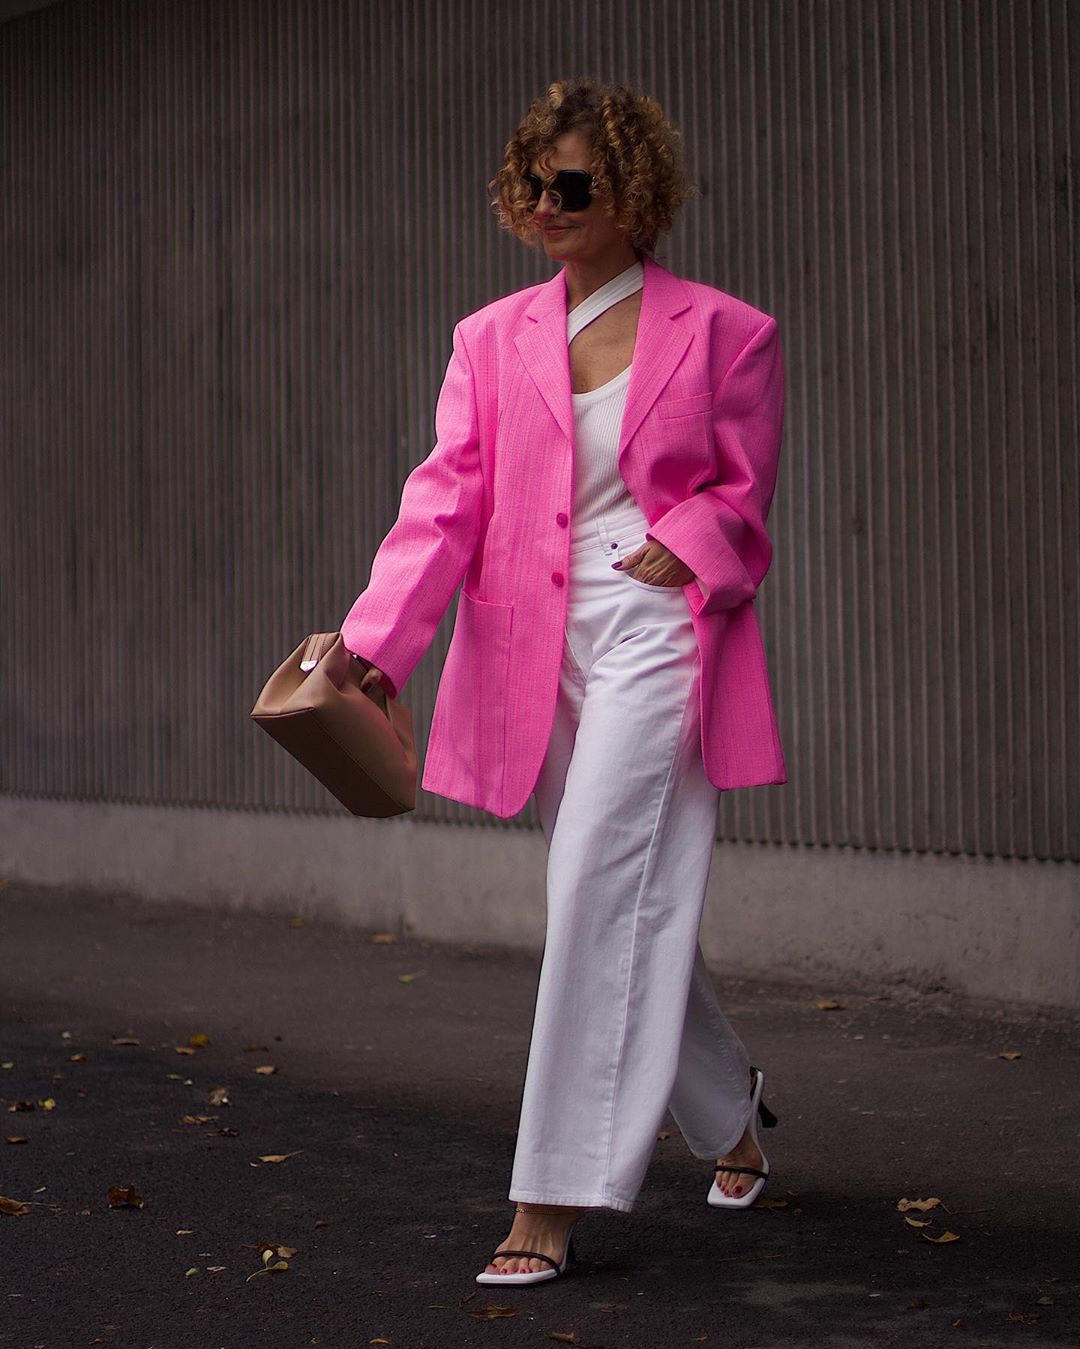 Style tips to learn from women over 40